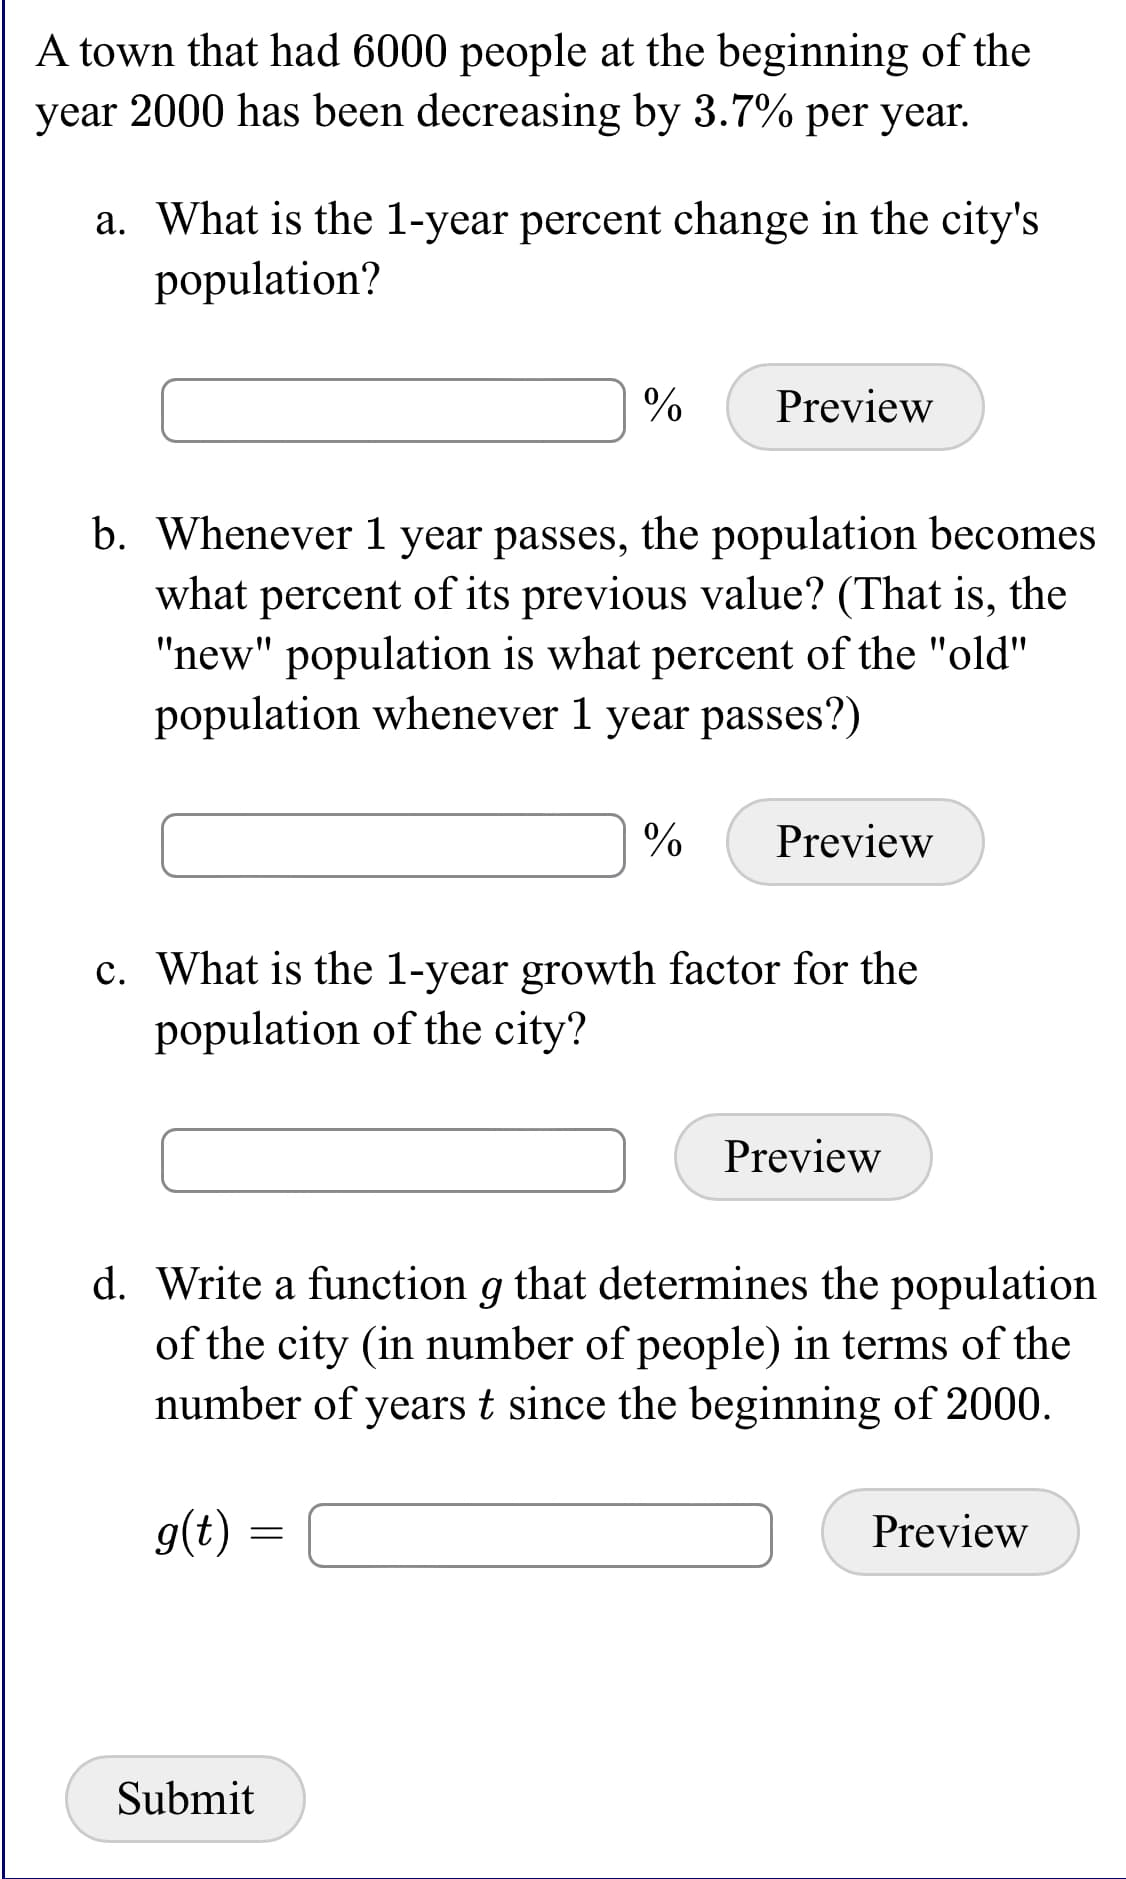 A town that had 6000 people at the beginning of the
year 2000 has been decreasing by 3.7% per year.
a. What is the 1-year percent change in the city's
population?
%
Preview
b. Whenever 1 year passes, the population becomes
what percent of its previous value? (That is, the
"new" population is what percent of the "old"
population whenever 1 year passes?)
Preview
c. What is the 1-year growth factor for the
population of the city?
Preview
d. Write a function g that determines the population
of the city (in number of people) in terms of the
number of years t since the beginning of 2000.
g(t)
Preview
Submit
